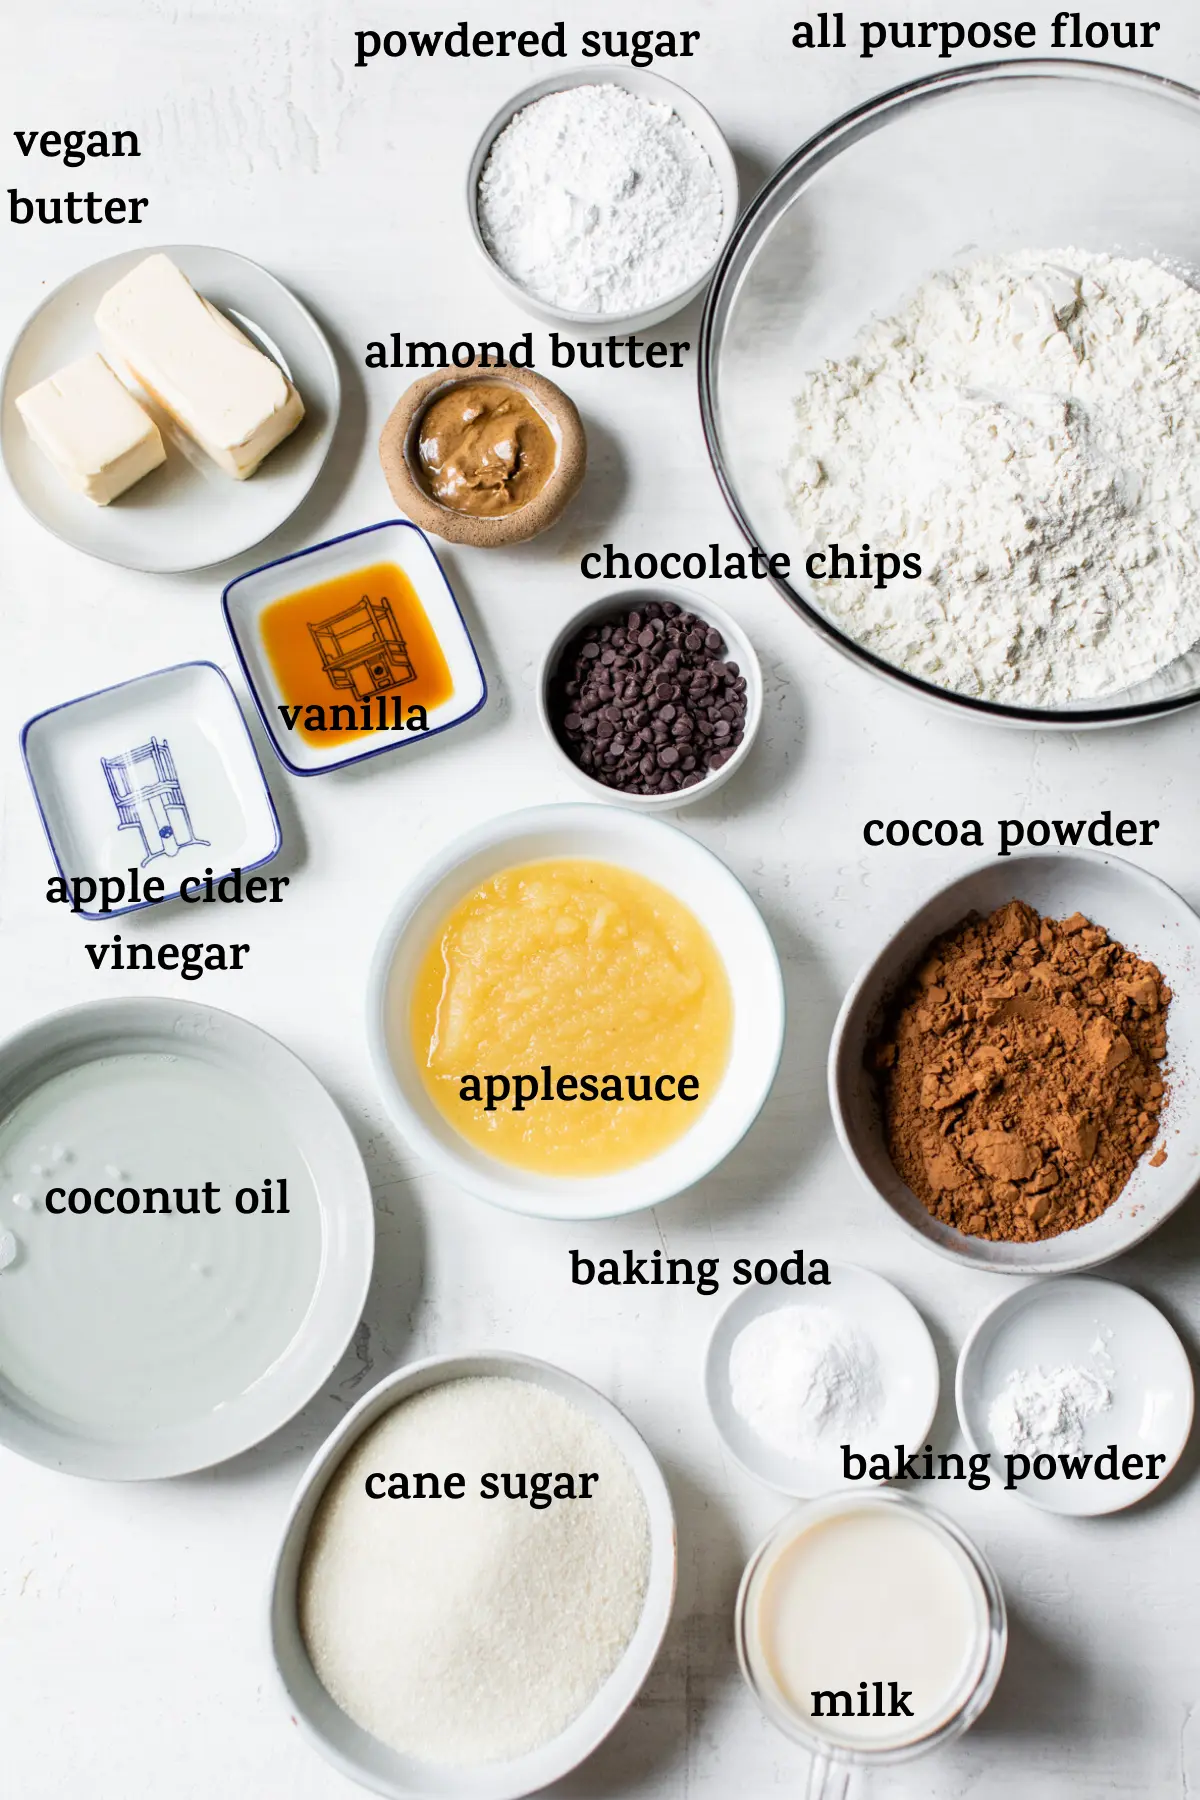 cake ingredients with text